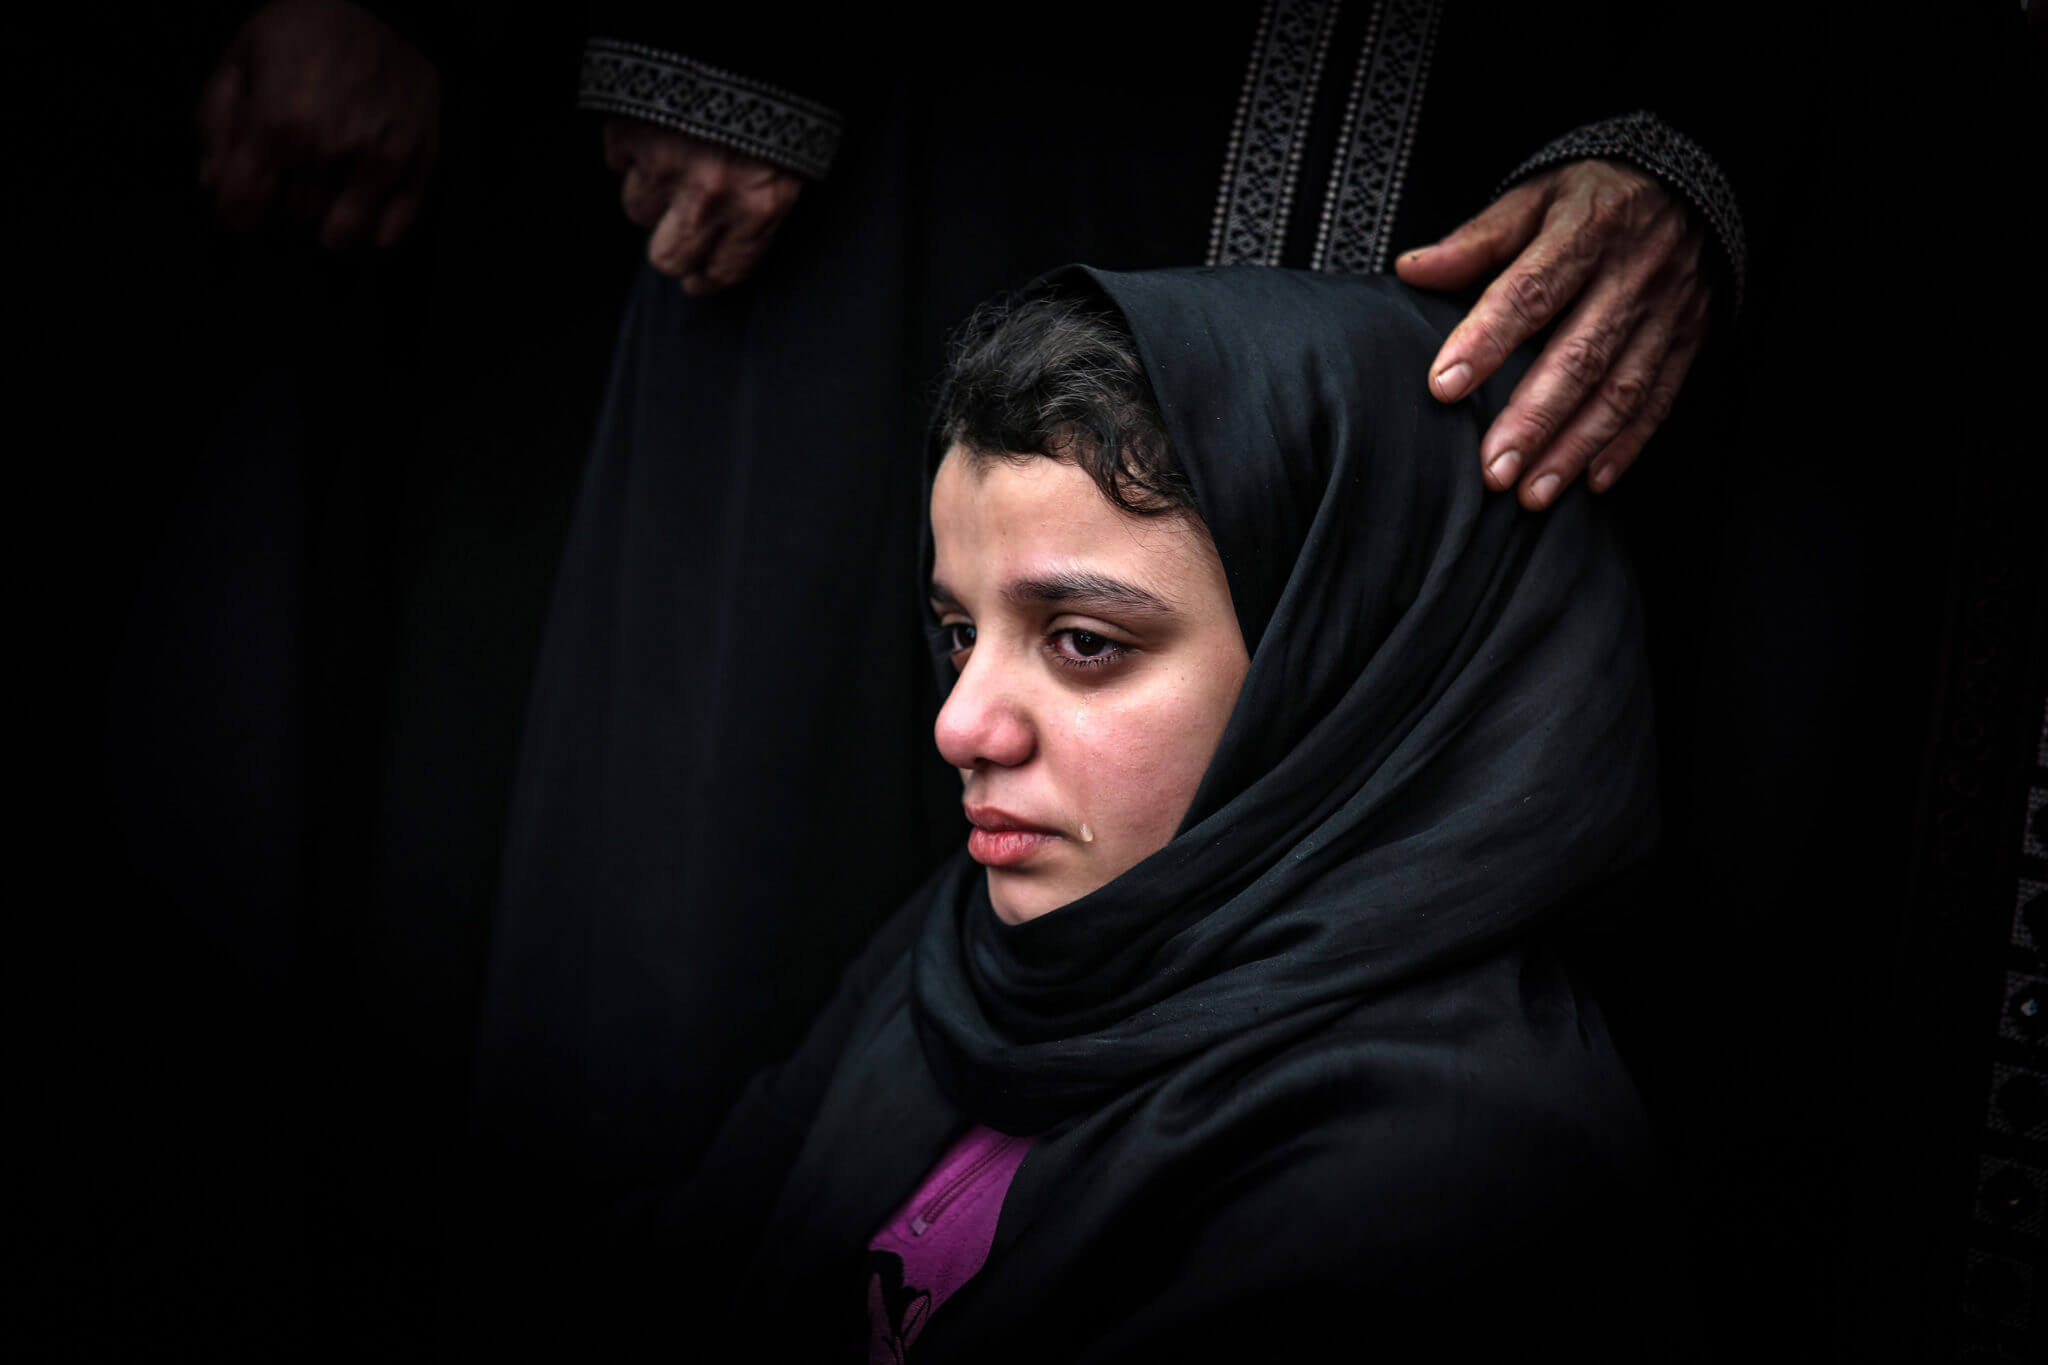 This photo taken on November 12 shows Fatma Abu al-Atta mourning during the funeral of her father, the top Islamic Jihad commander Bahaa Abu al-Atta who was killed by Israeli attack together with his wife Asma. (Photo: Mohammed Zaanoun / Activestills.org)